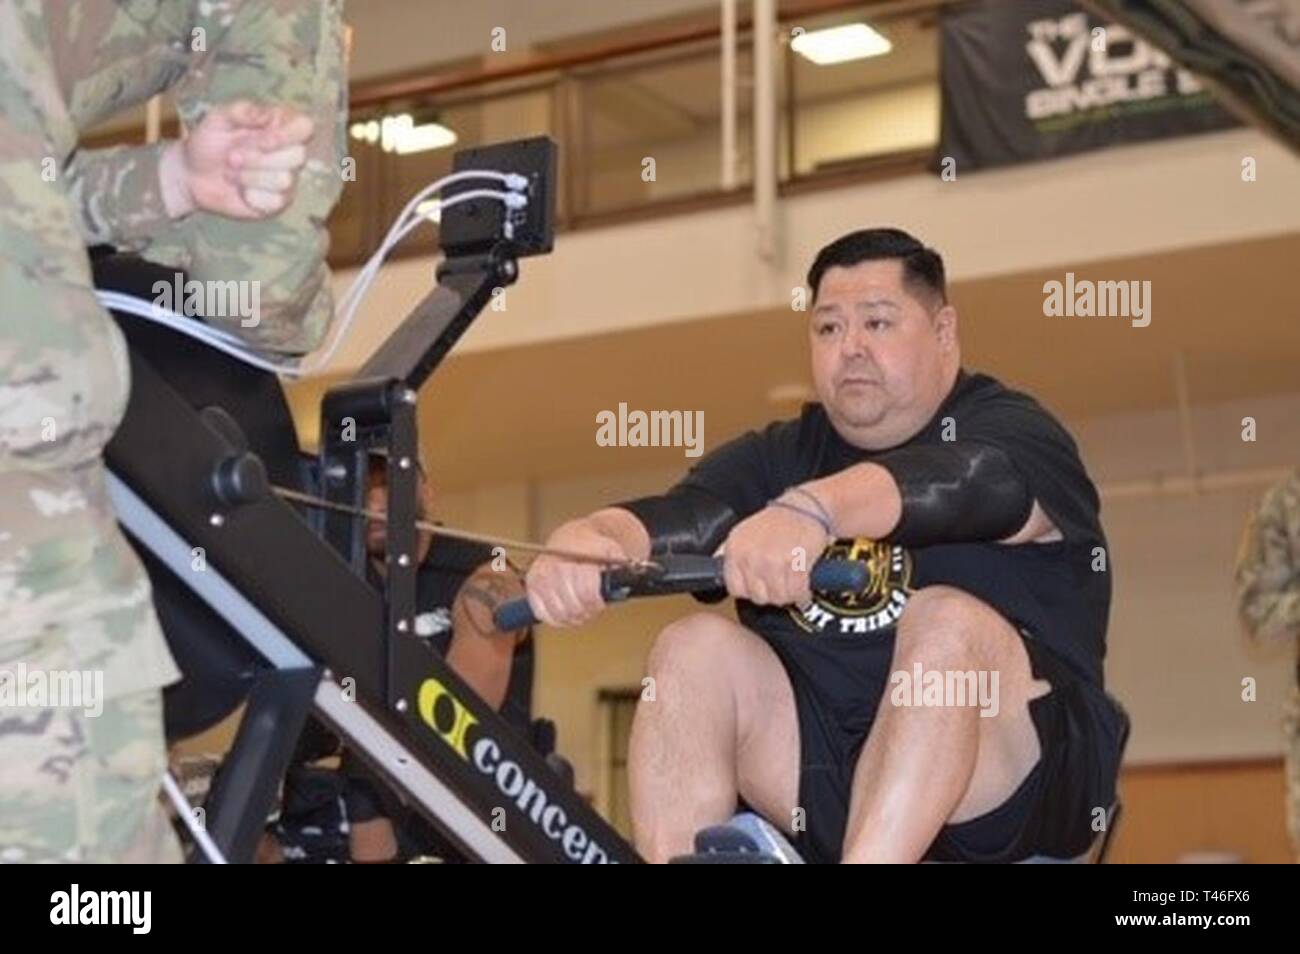 Retired Staff Sgt. Michael Shaw participates in the 2019 Army Trials indoor rowing competition, March 7, at Fort Bliss, Texas. Army Trials is an adaptive-sports competition taking place from March 5 - 16 with nearly 100 wounded, ill and injured active-duty Soldiers and veterans competing in 14 different adaptive sports for the opportunity to represent Team Army at the 2019 Department of Defense Warrior Games in Tampa, Florida. Stock Photo